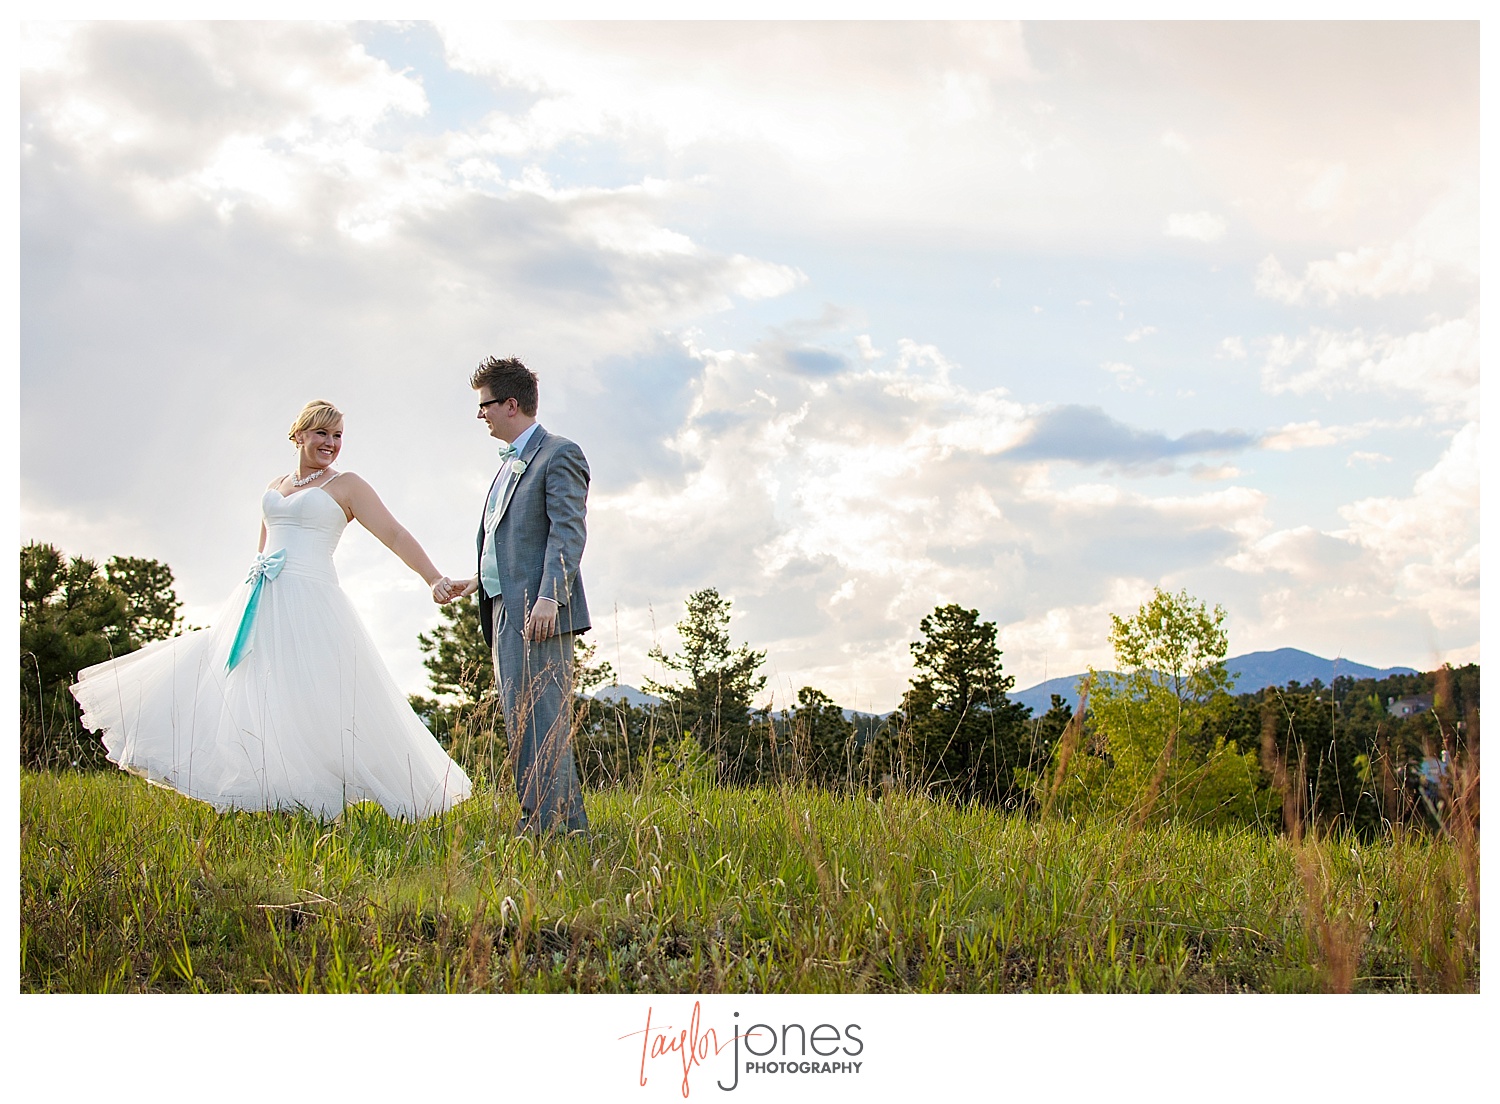 Bride and groom portraits at Pines at Genesee spring wedding reception